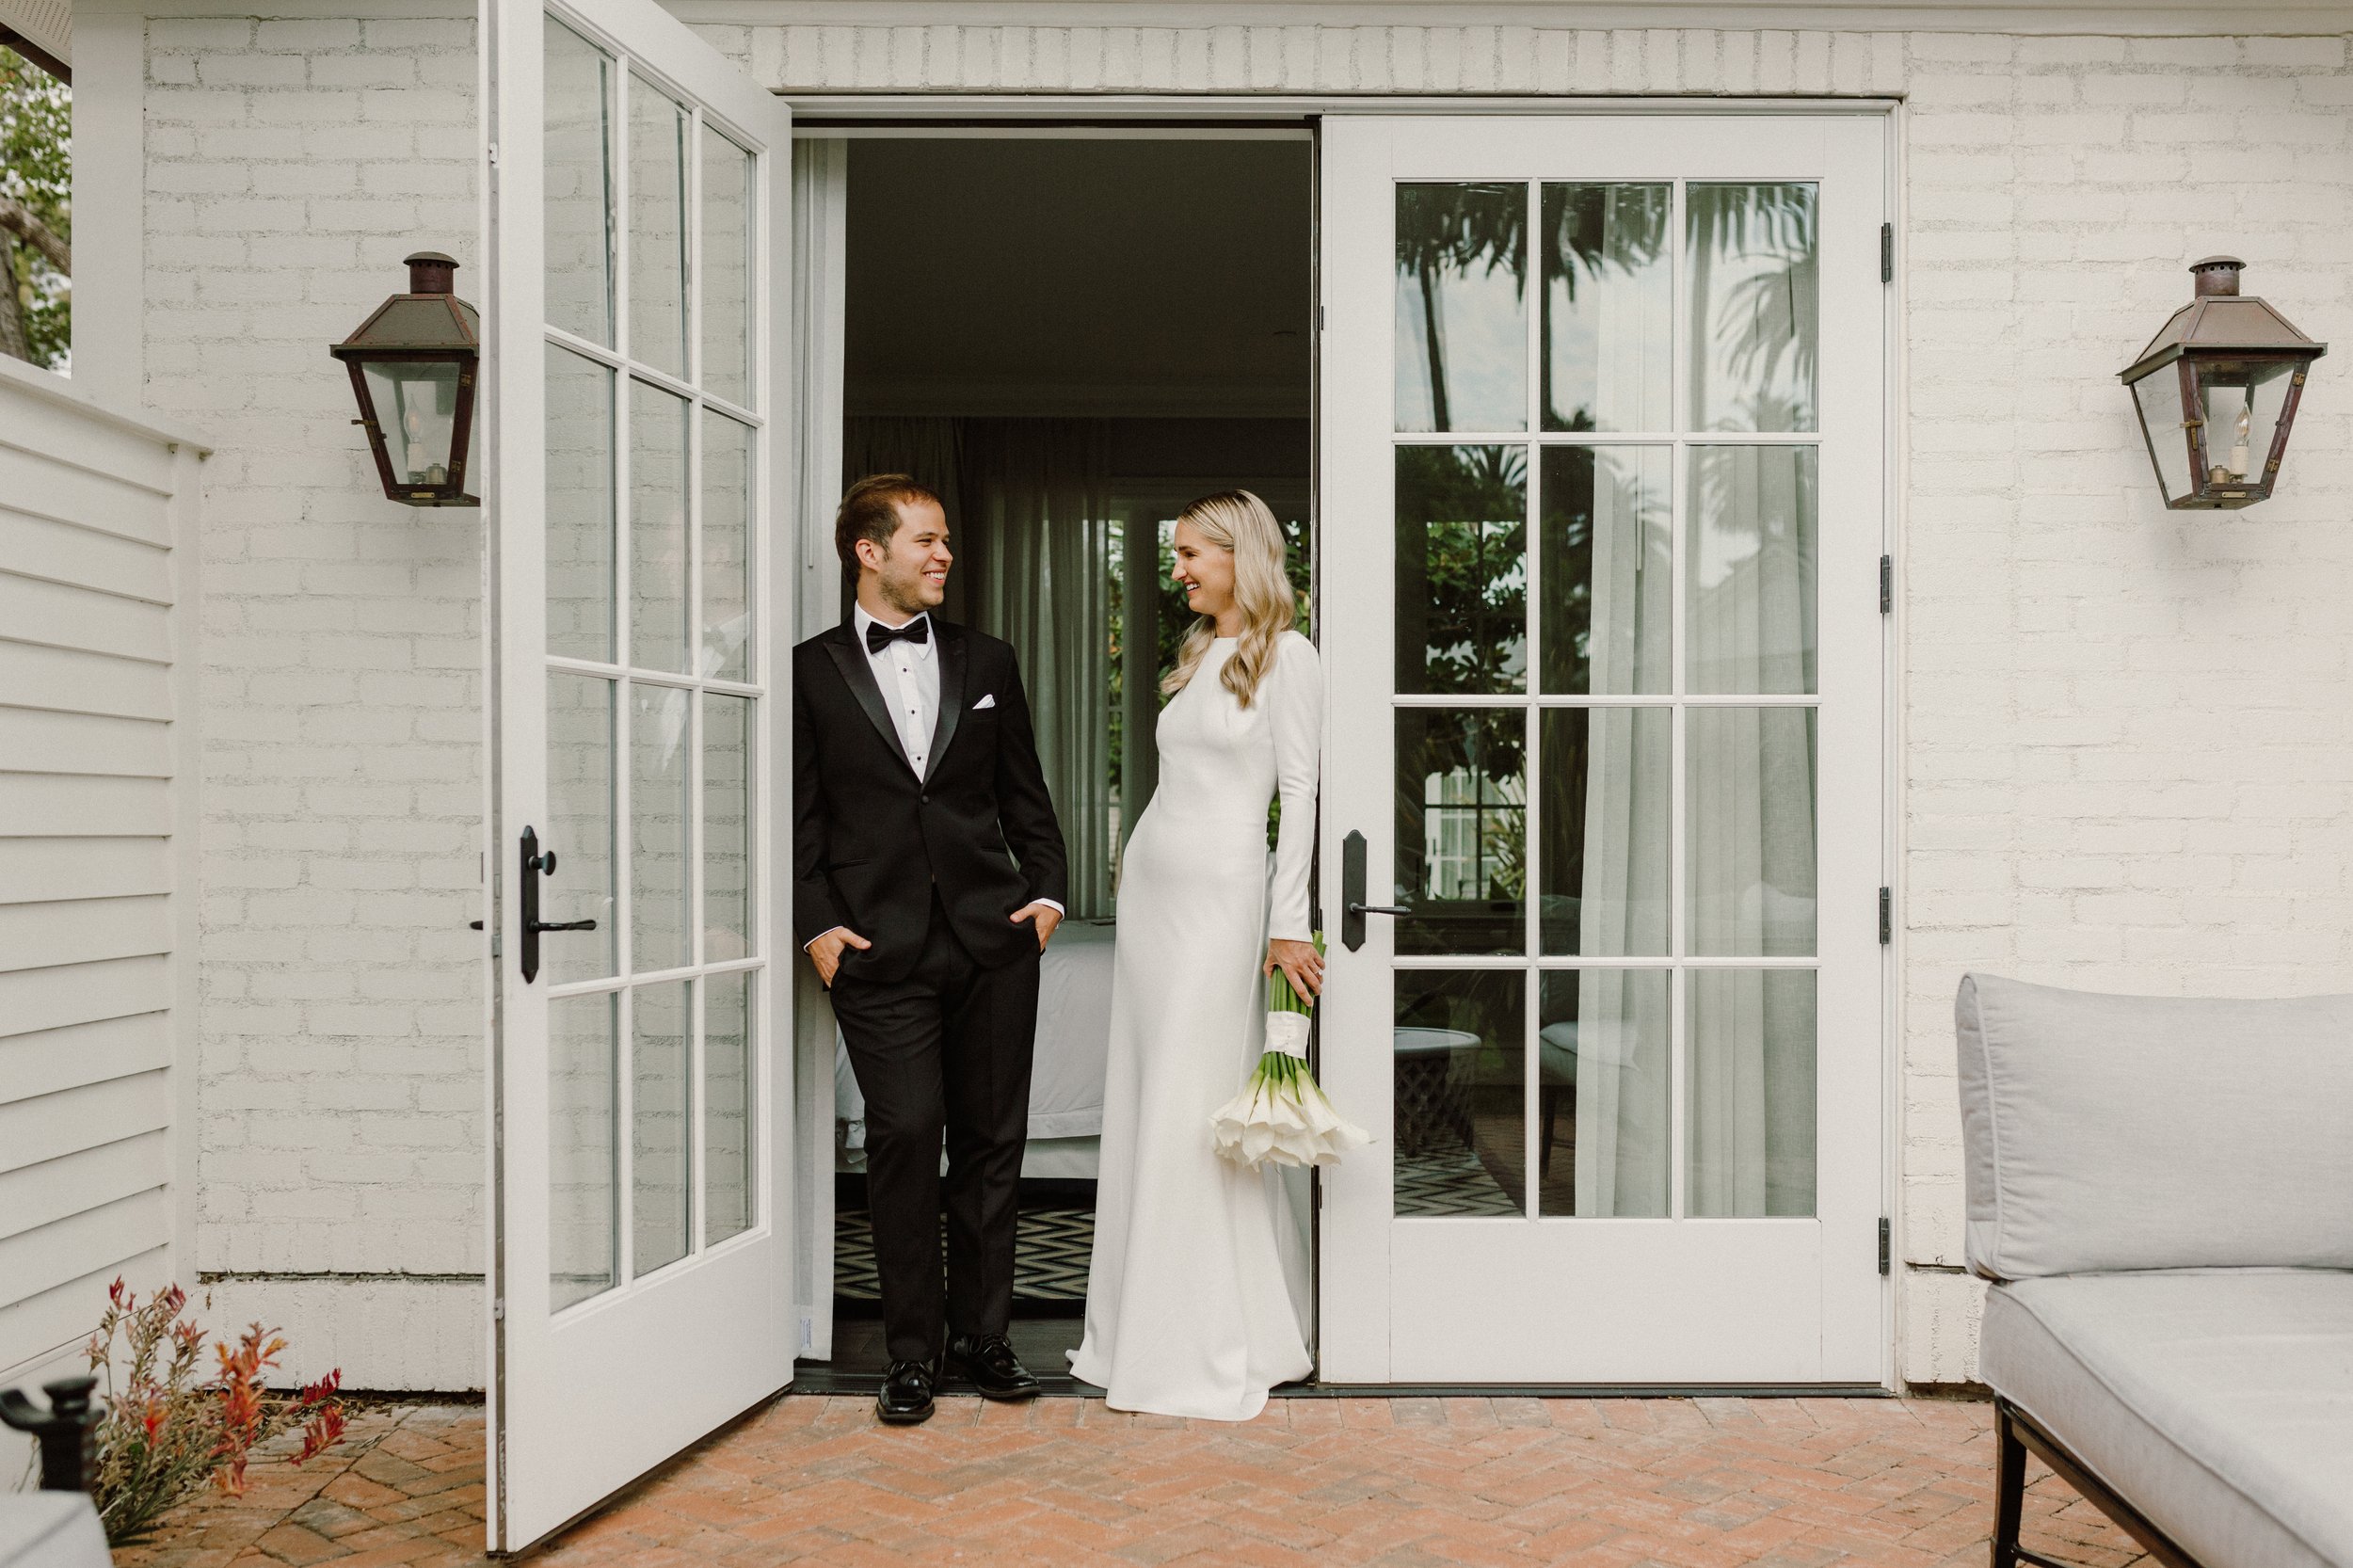 www.santabarbarawedding.com | Nicole Donnelly | Rosewood Miramar Beach | Alpha Floral | BHLDN | On Location Hair &amp; Makeup | Bride and Groom in the Doorway